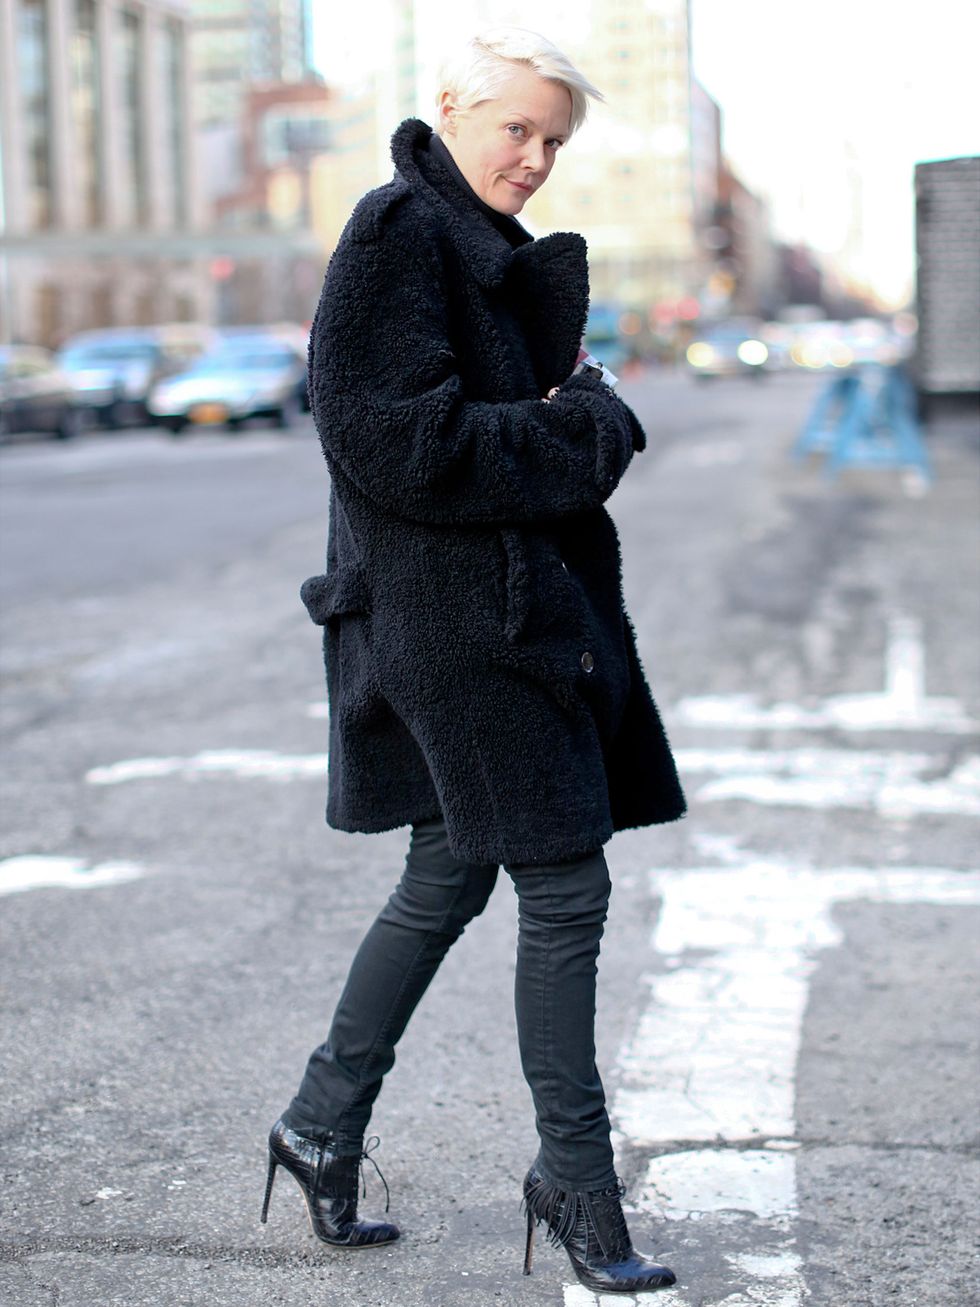 Clothing, Footwear, Winter, Infrastructure, Road, Textile, Street, Outerwear, Coat, Street fashion, 